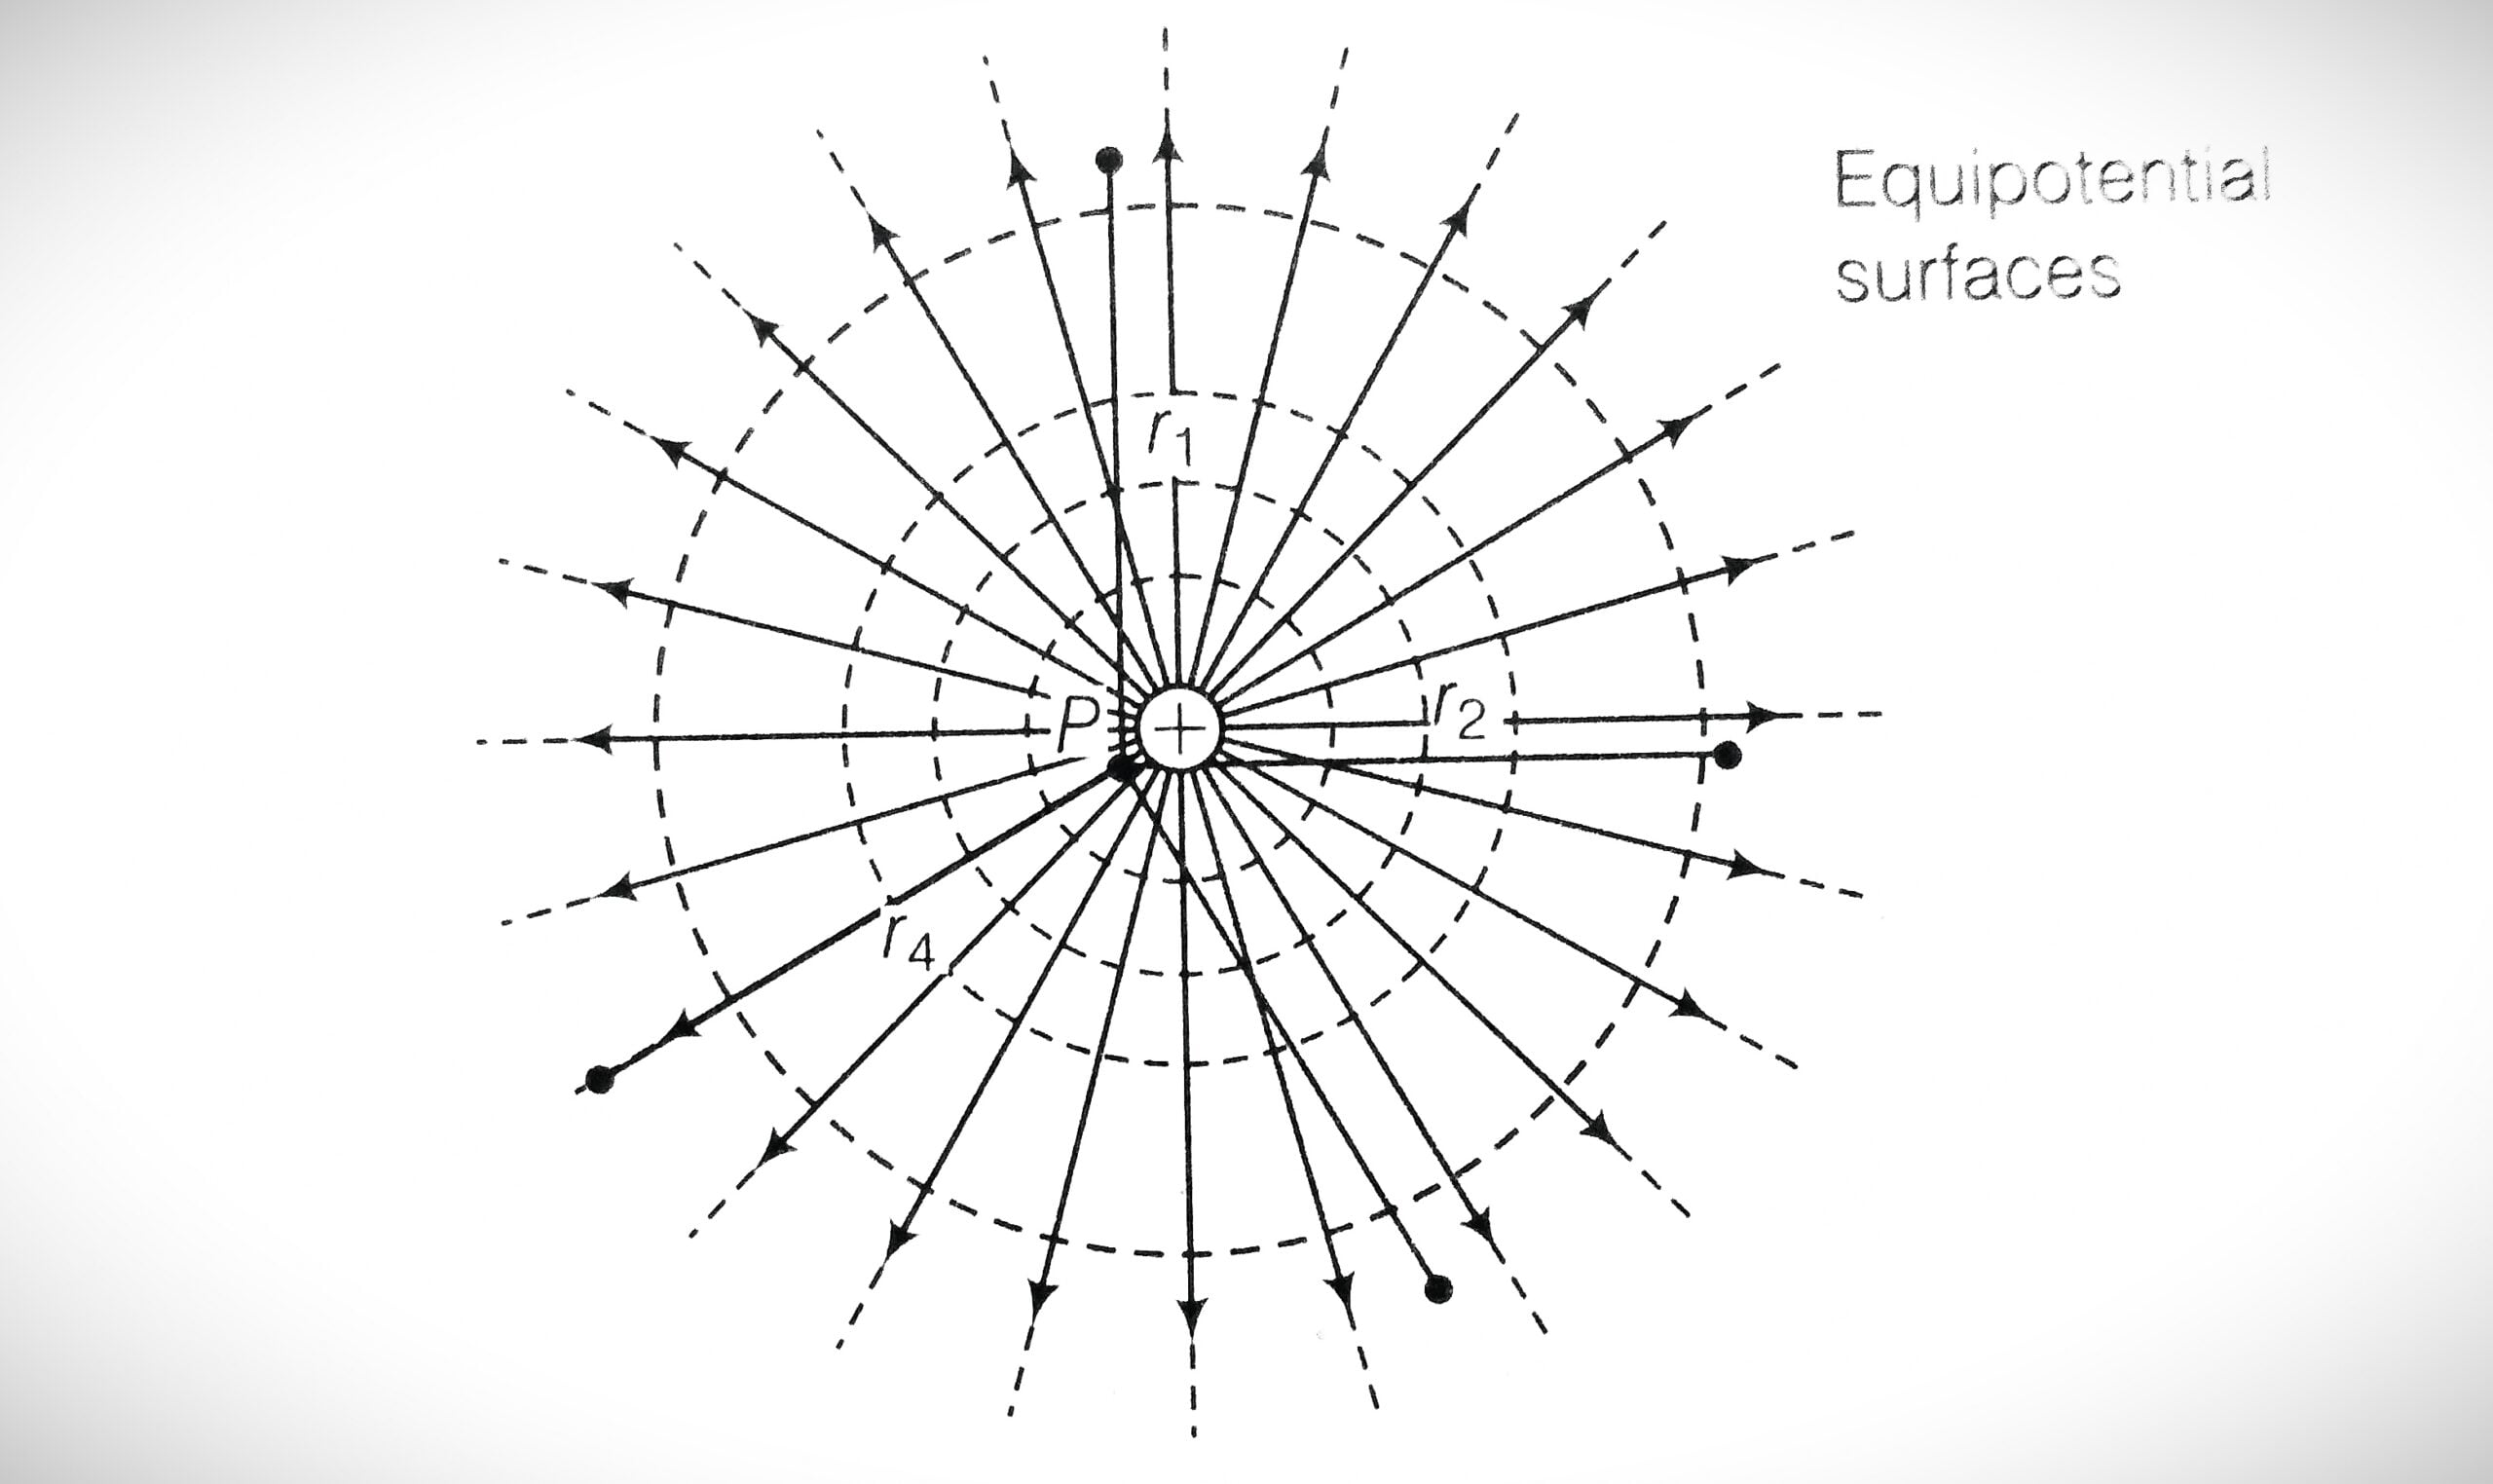 Equipotential surface of a point charge